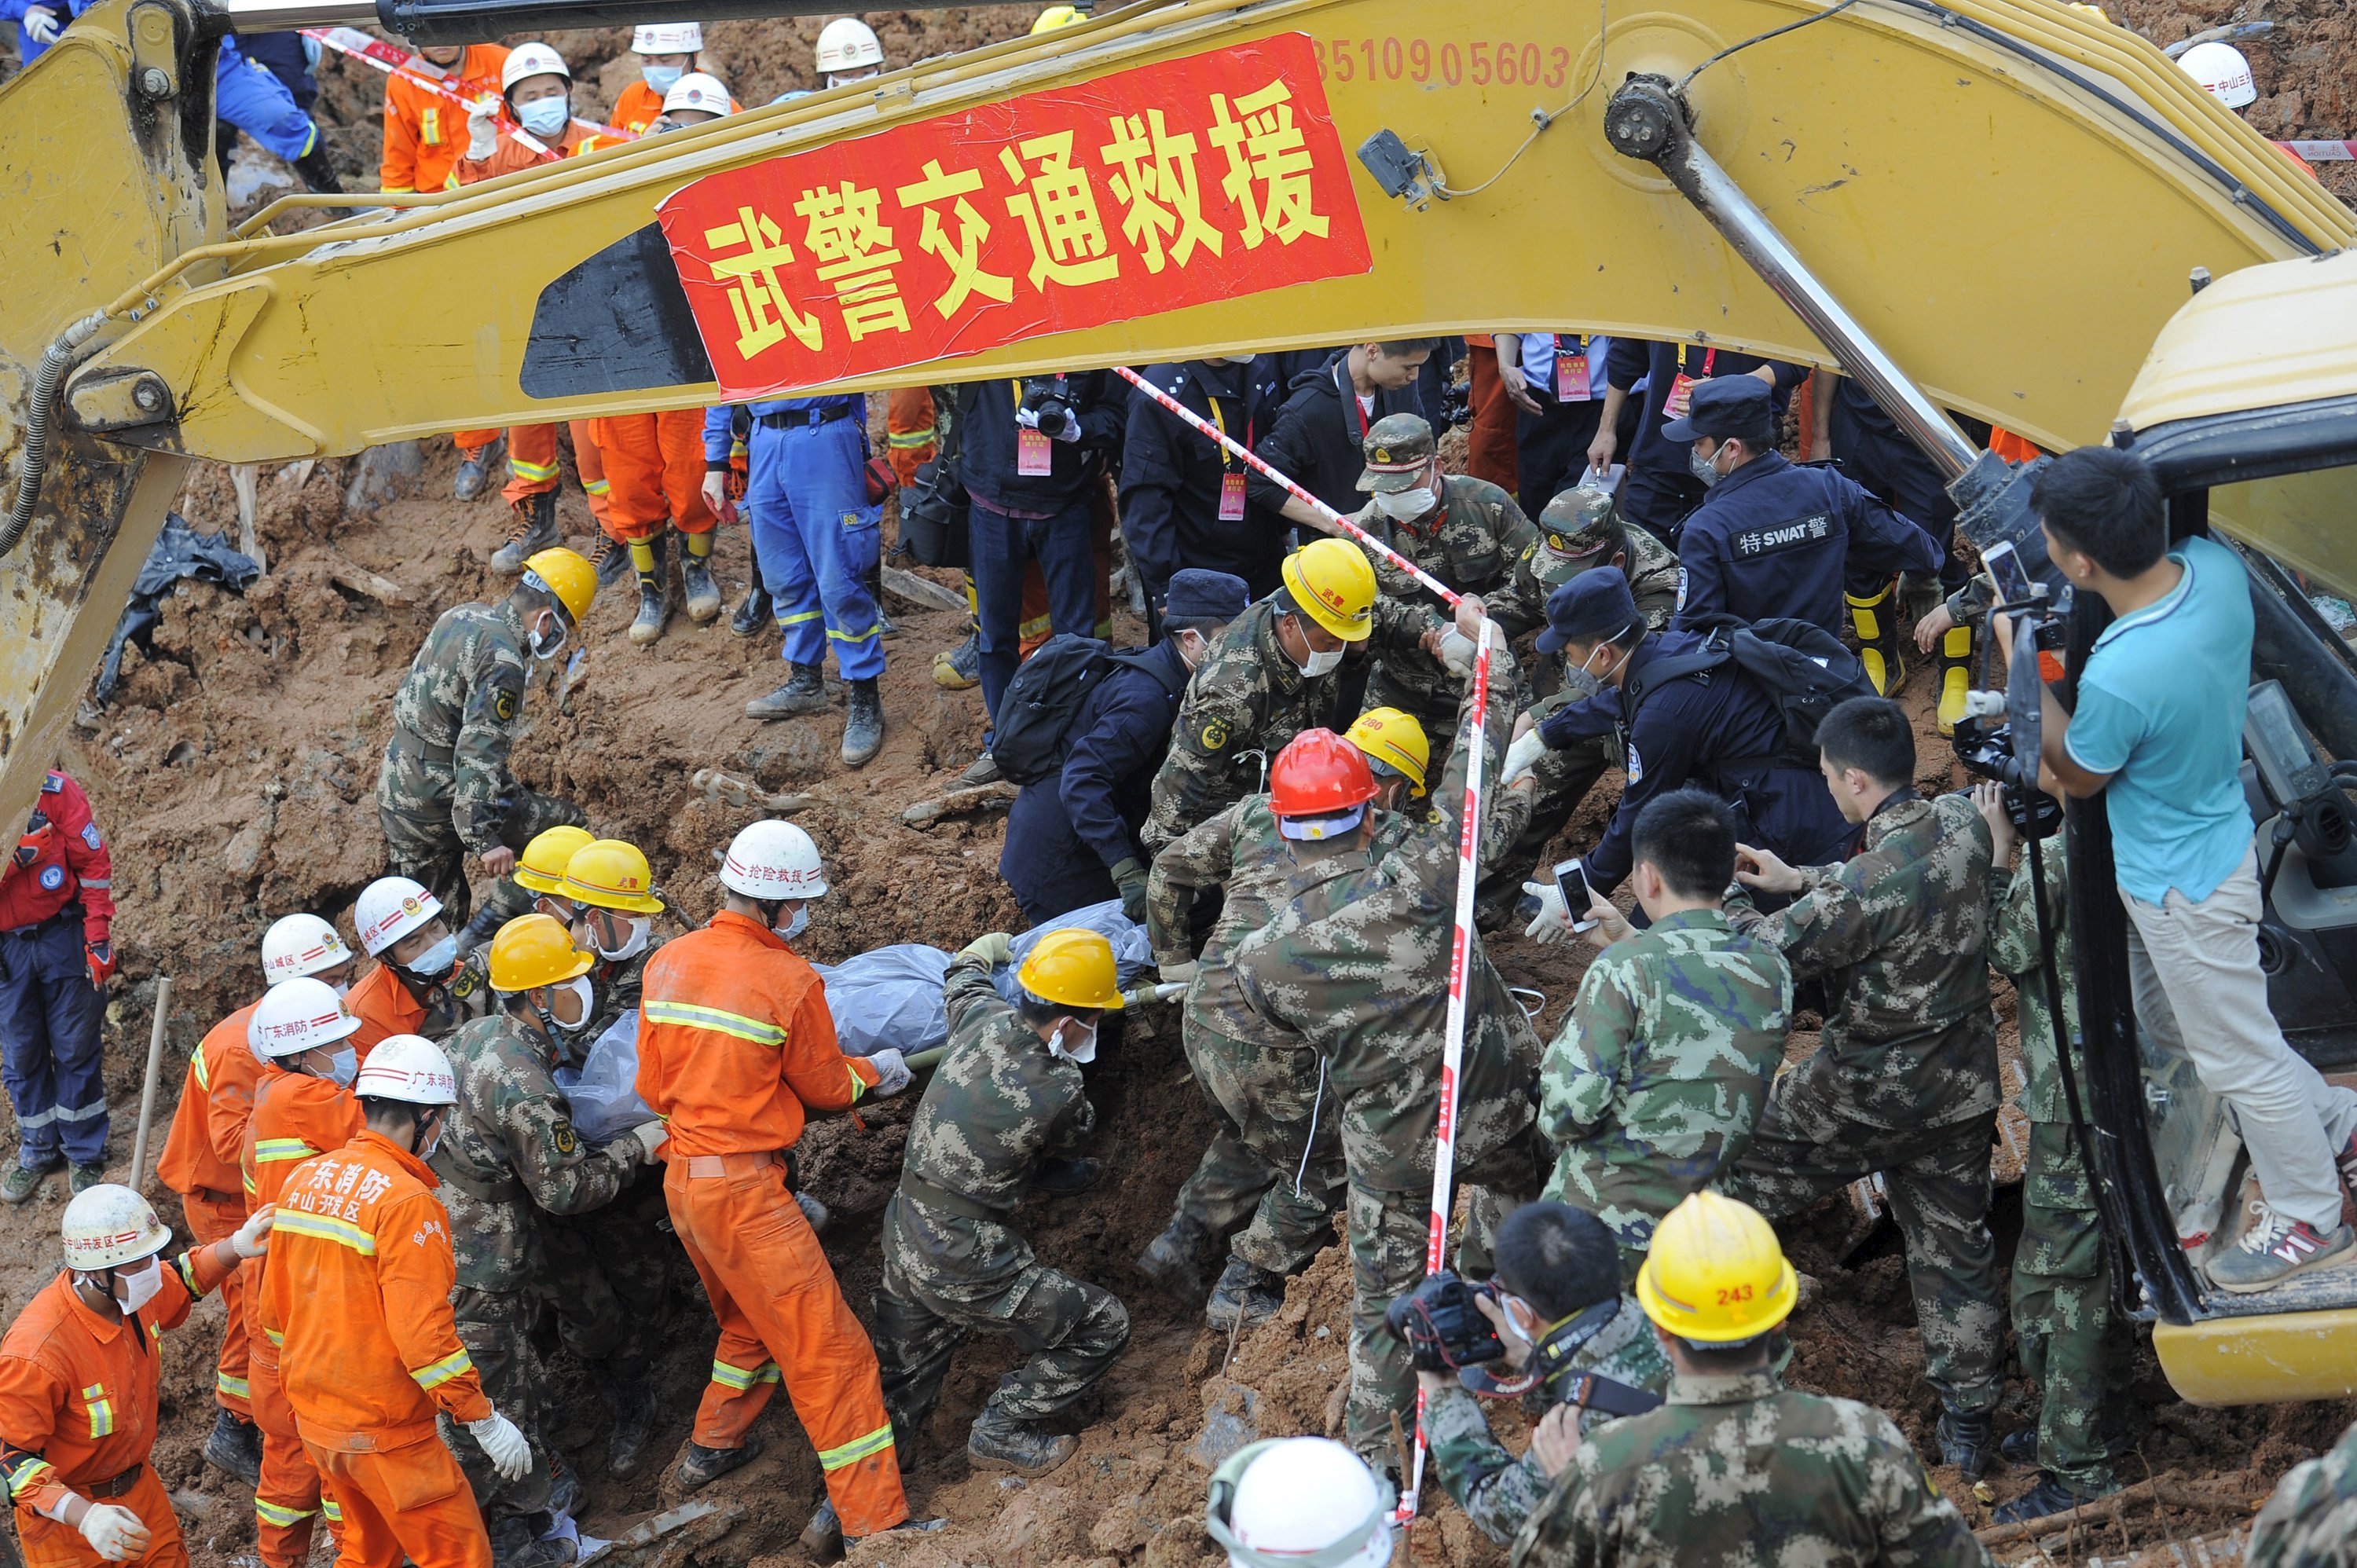 Rescuers carry the body of a victim after being pulled out among the debris of at the site of a landslide which hit an industrial park on Sunday, in Shenzhen, Guangdong province, China, December 23, 2015. Picture taken December 23, 2015. REUTERS/Stringer ATTENTION EDITORS - THIS PICTURE WAS PROVIDED BY A THIRD PARTY. THIS PICTURE IS DISTRIBUTED EXACTLY AS RECEIVED BY REUTERS, AS A SERVICE TO CLIENTS. CHINA OUT. NO COMMERCIAL OR EDITORIAL SALES IN CHINA.